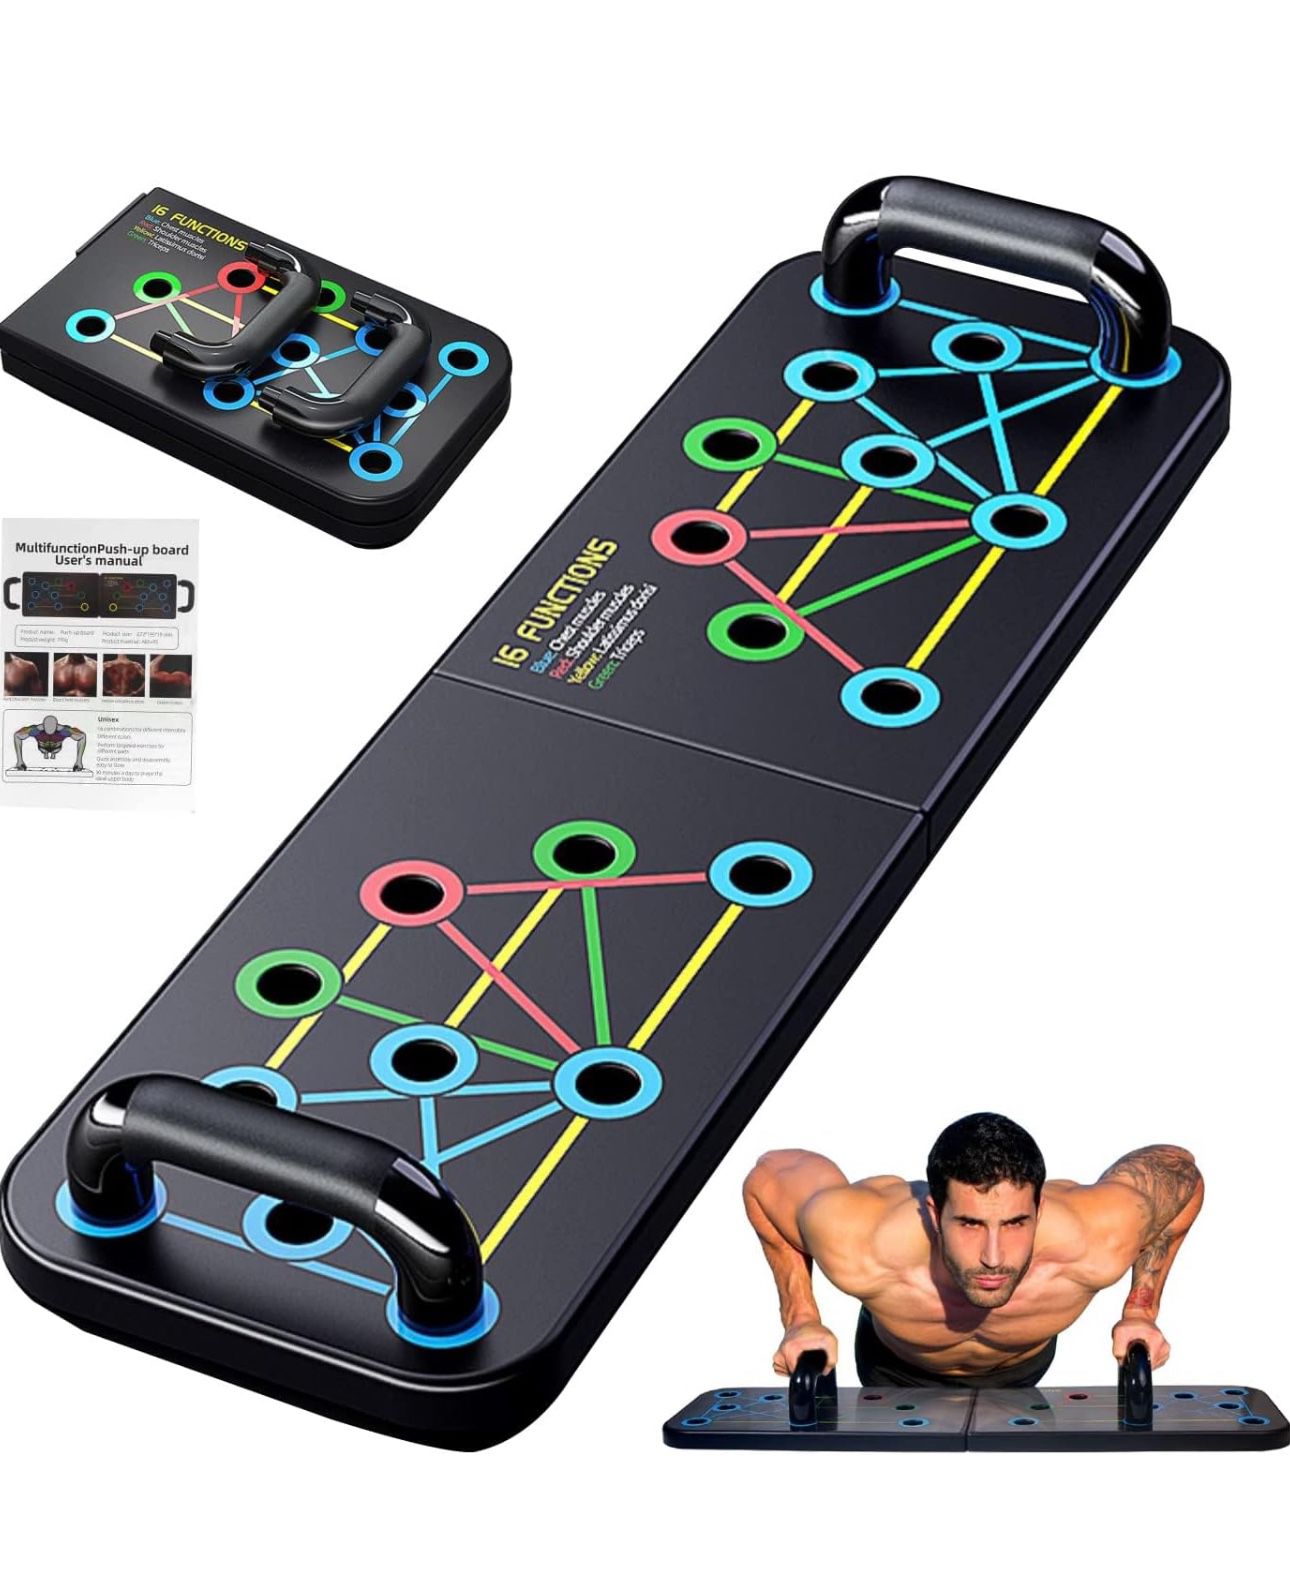 Push Up Board, SRIEEM Multi-function Detachable Push Up Bar, Portable Push up Handles for Floor，Portable Home Gym Workout Equipment for Men and Women